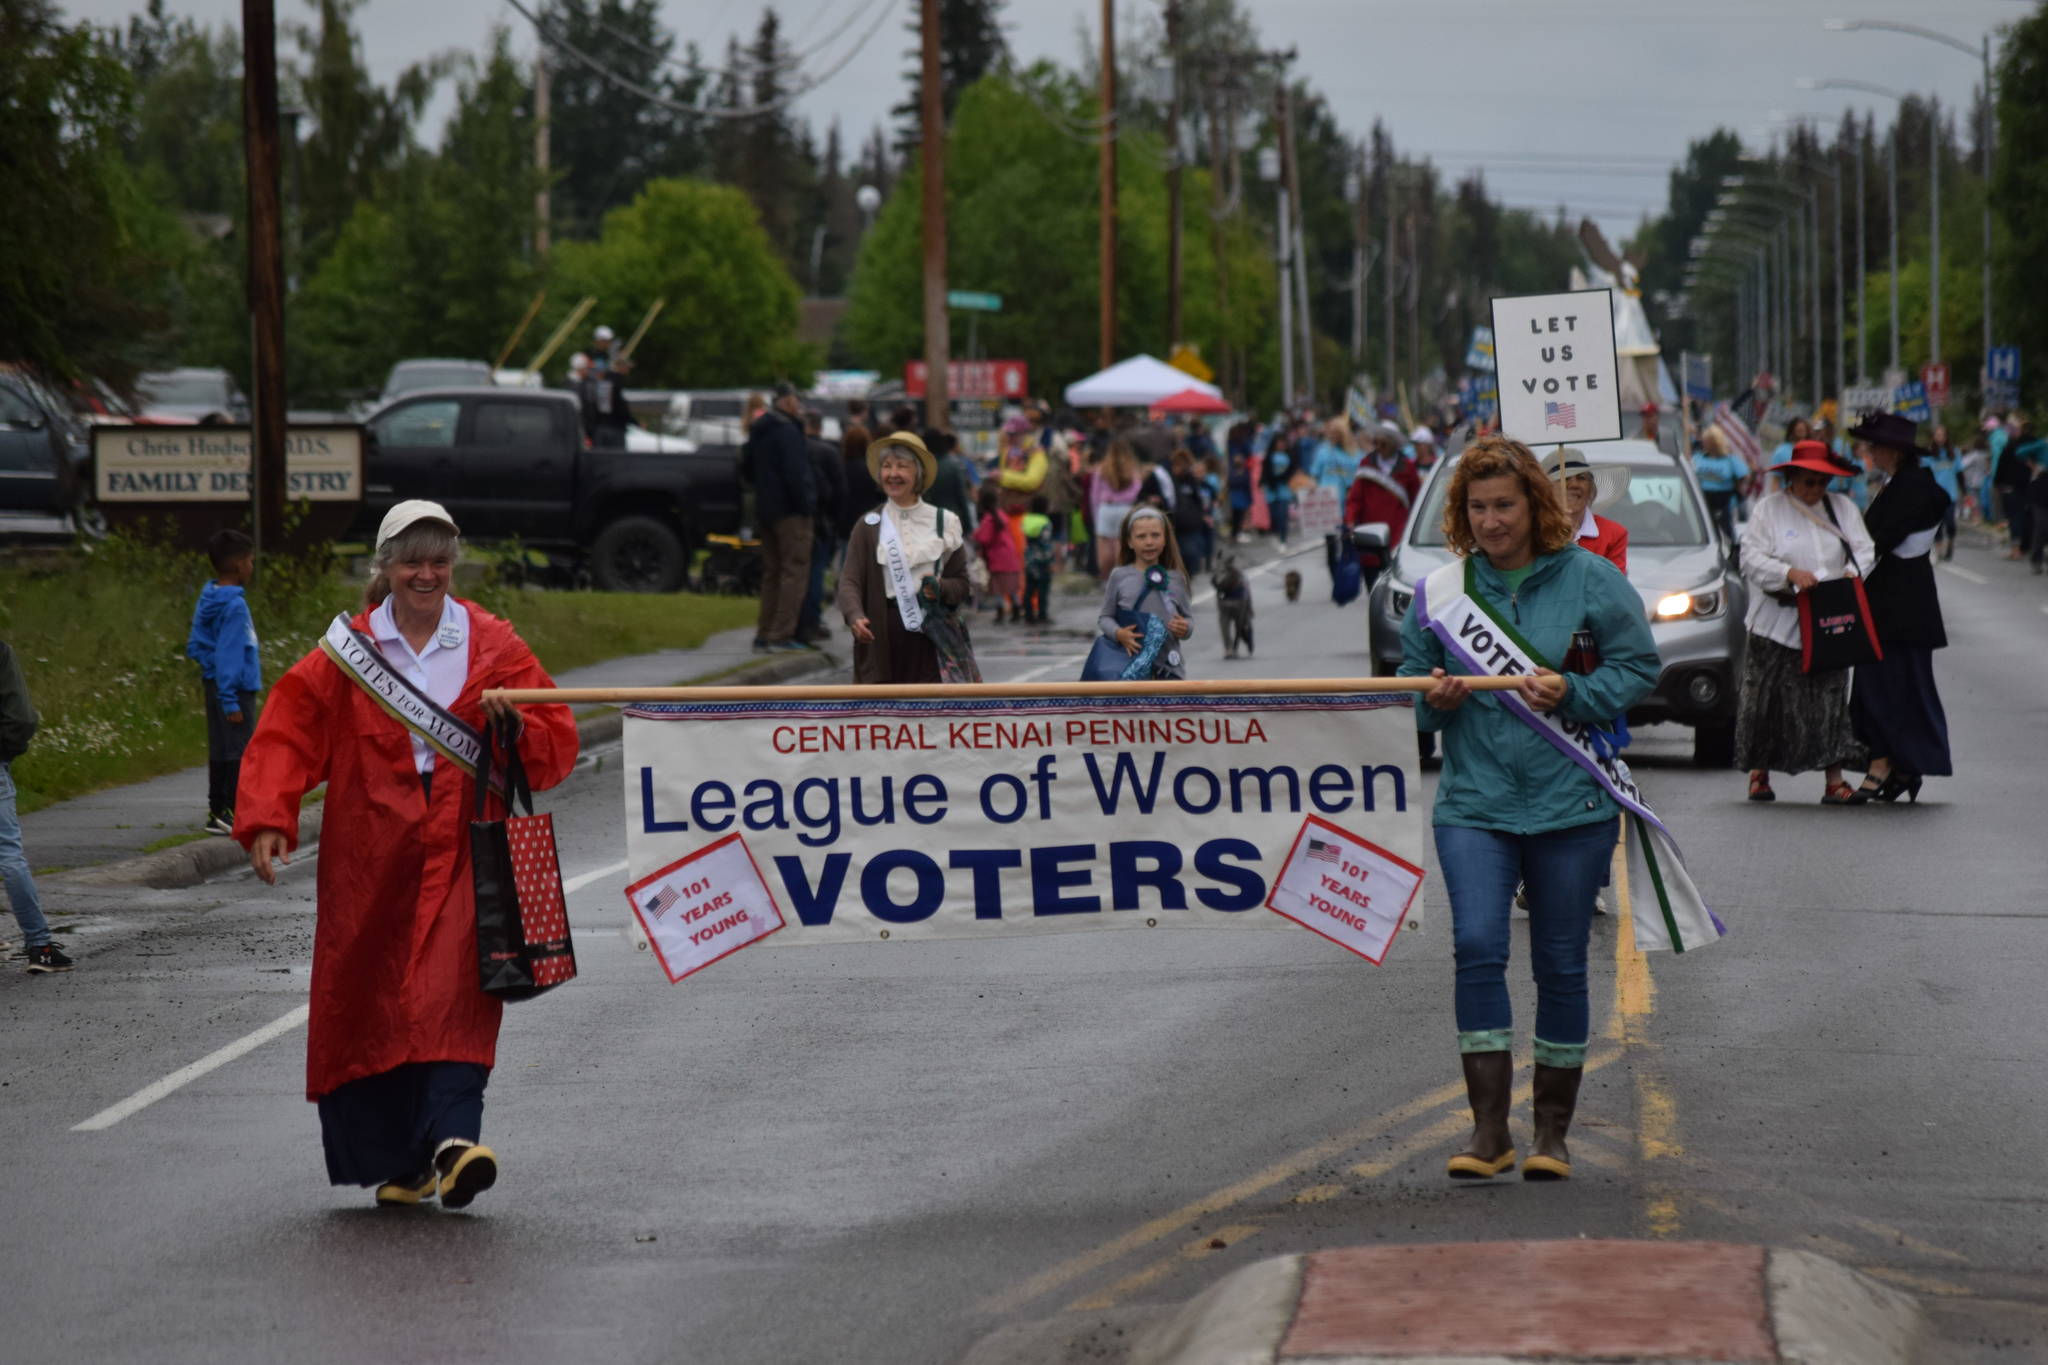 Members of the League of Women Voters wave to the crowd during the Soldotna Progress Days parade on Saturday, July 24, 2021. (Camille Botello / Peninsula Clarion)